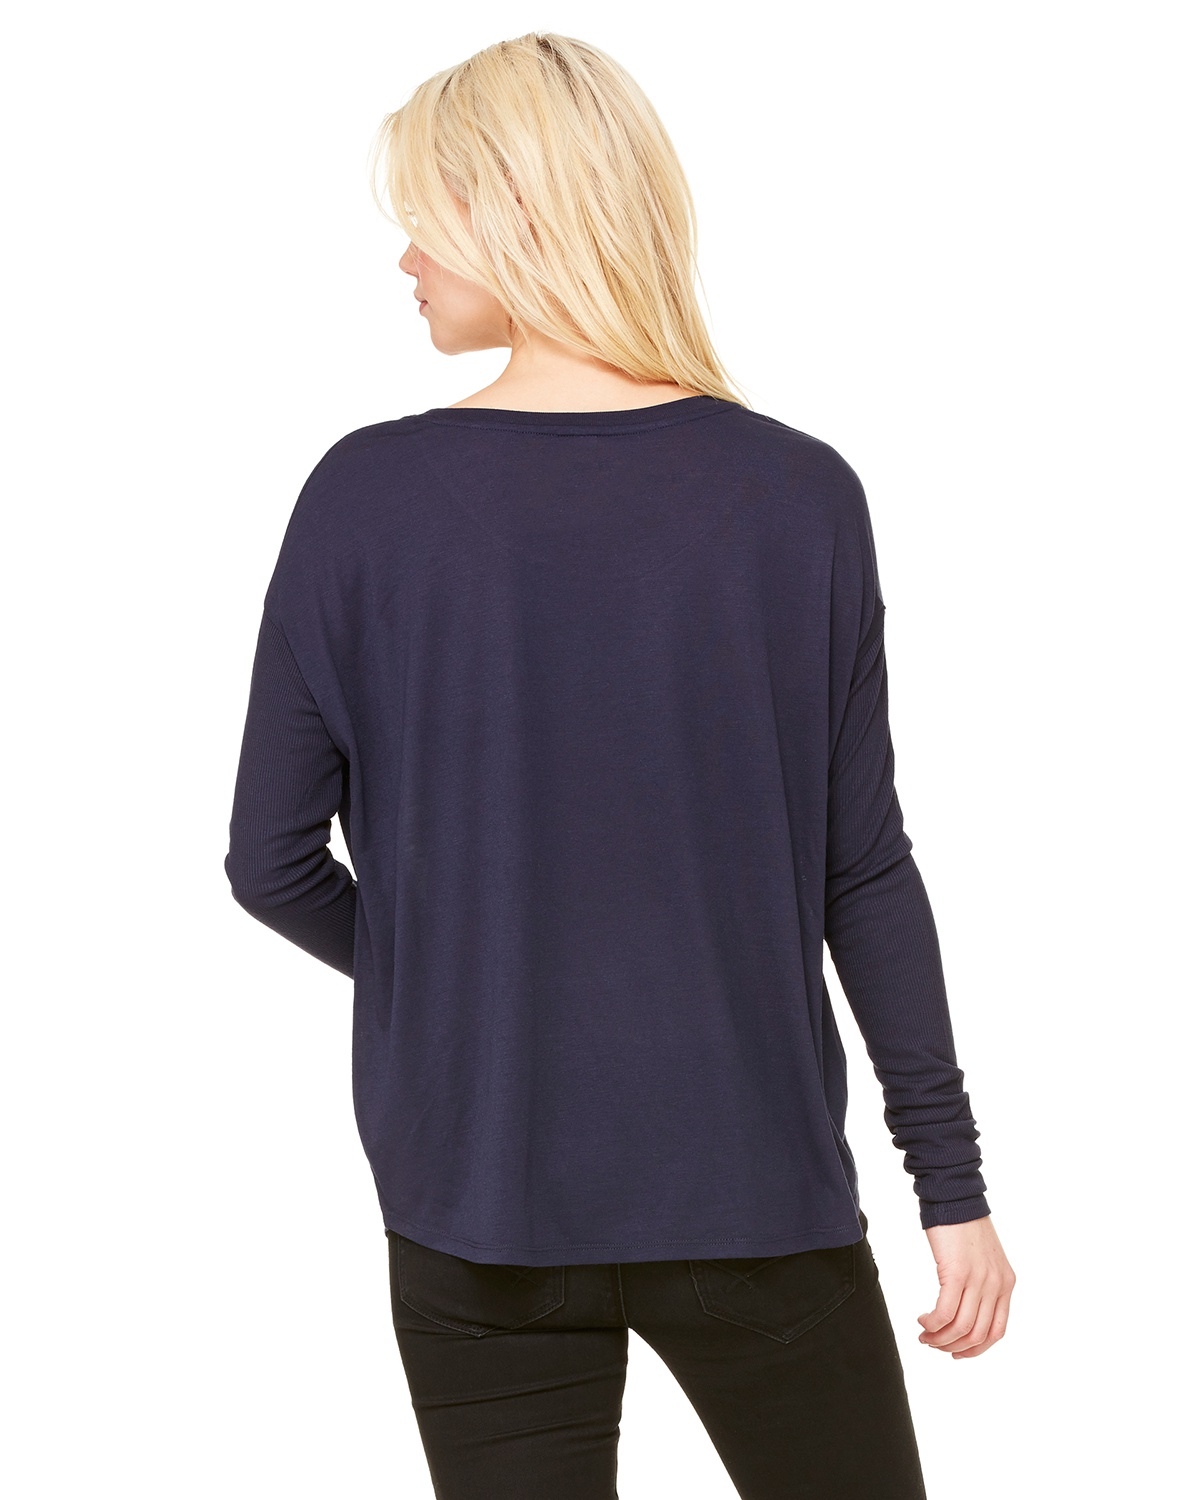 'Bella Canvas 8852 Ladies Flowy Long-Sleeve T-Shirt with 2x1 Sleeves'